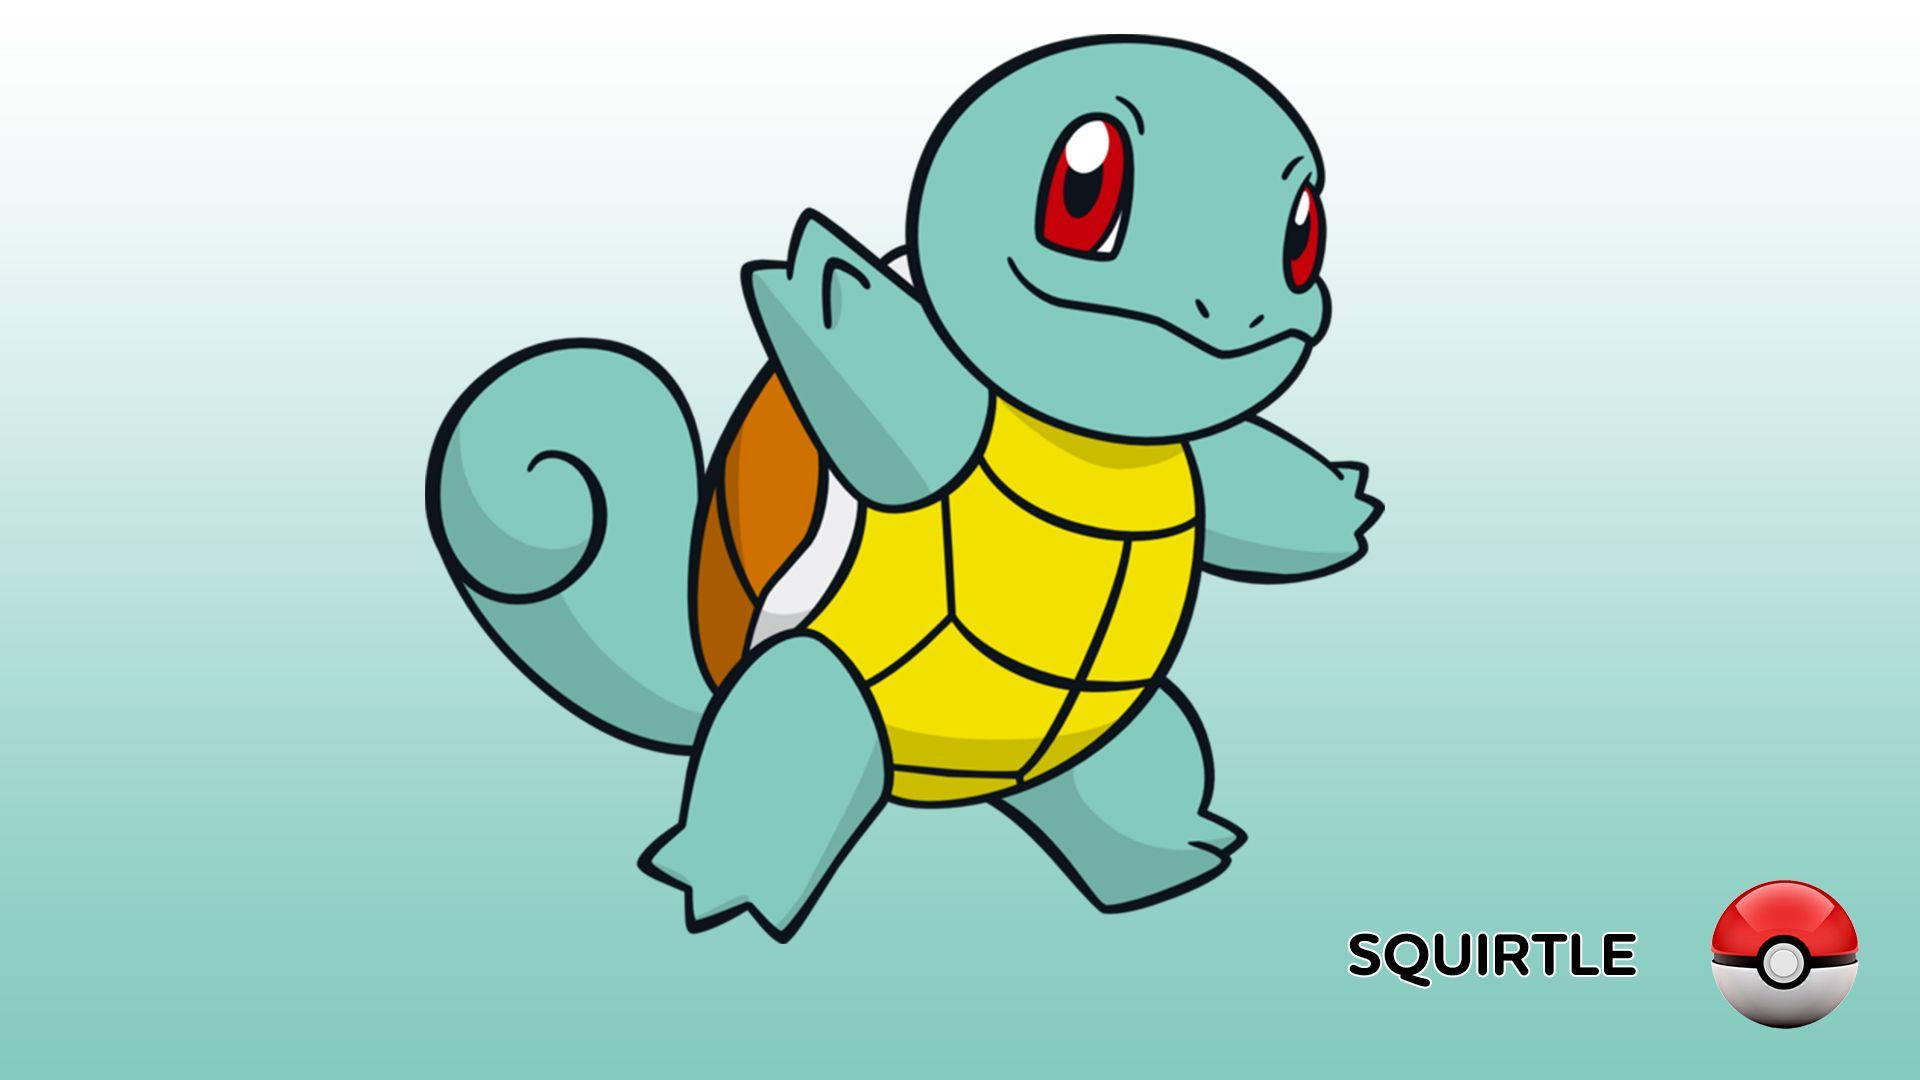 “adorable Squirtle”